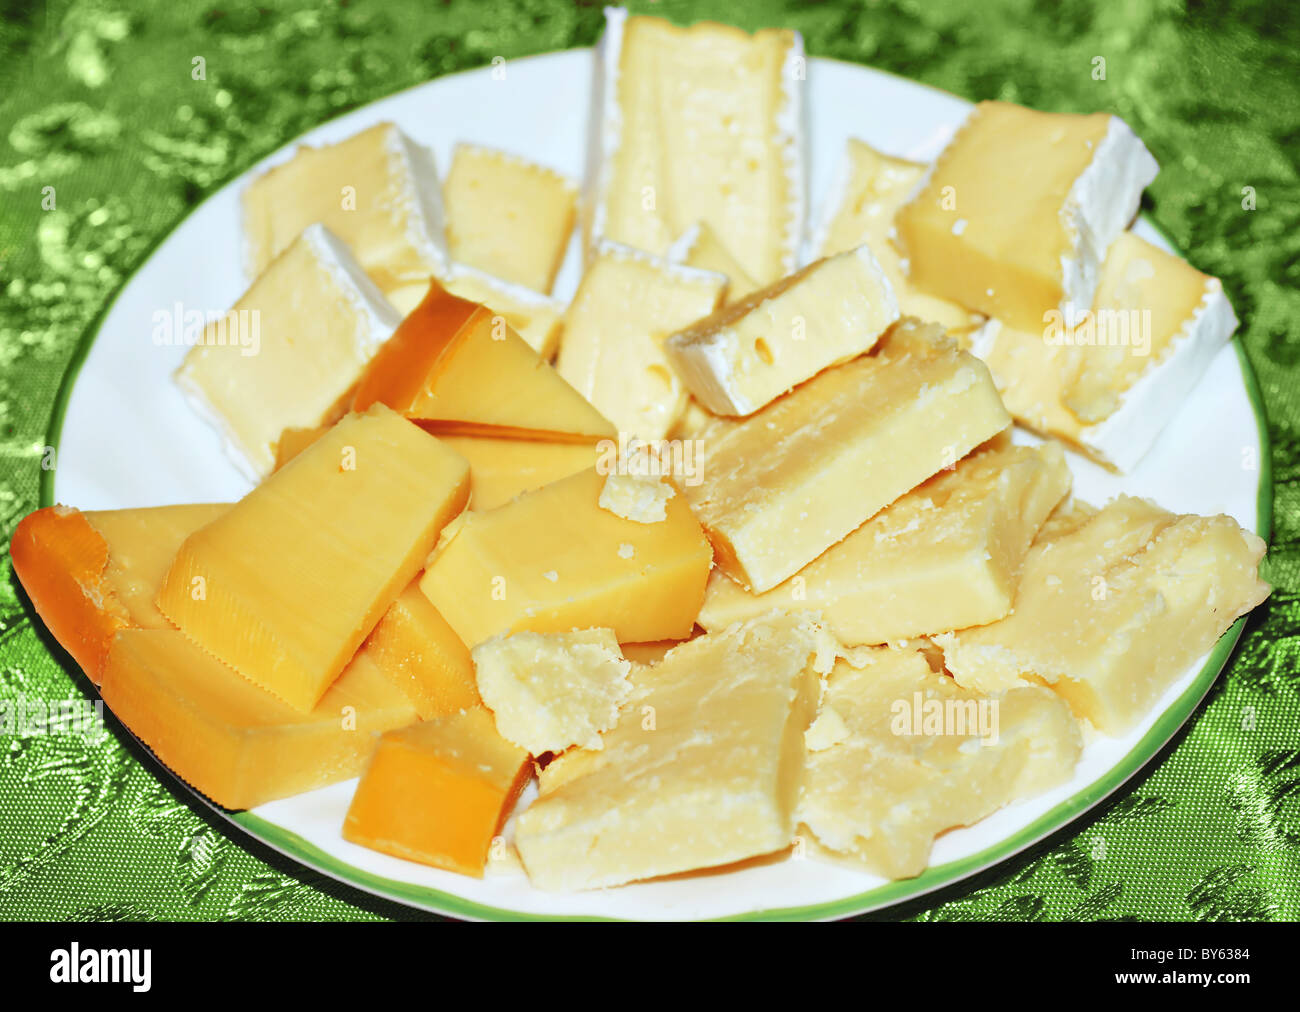 Cheese platter, gouda, old cheddar and brie served on a white plate on green table cloth. Stock Photo